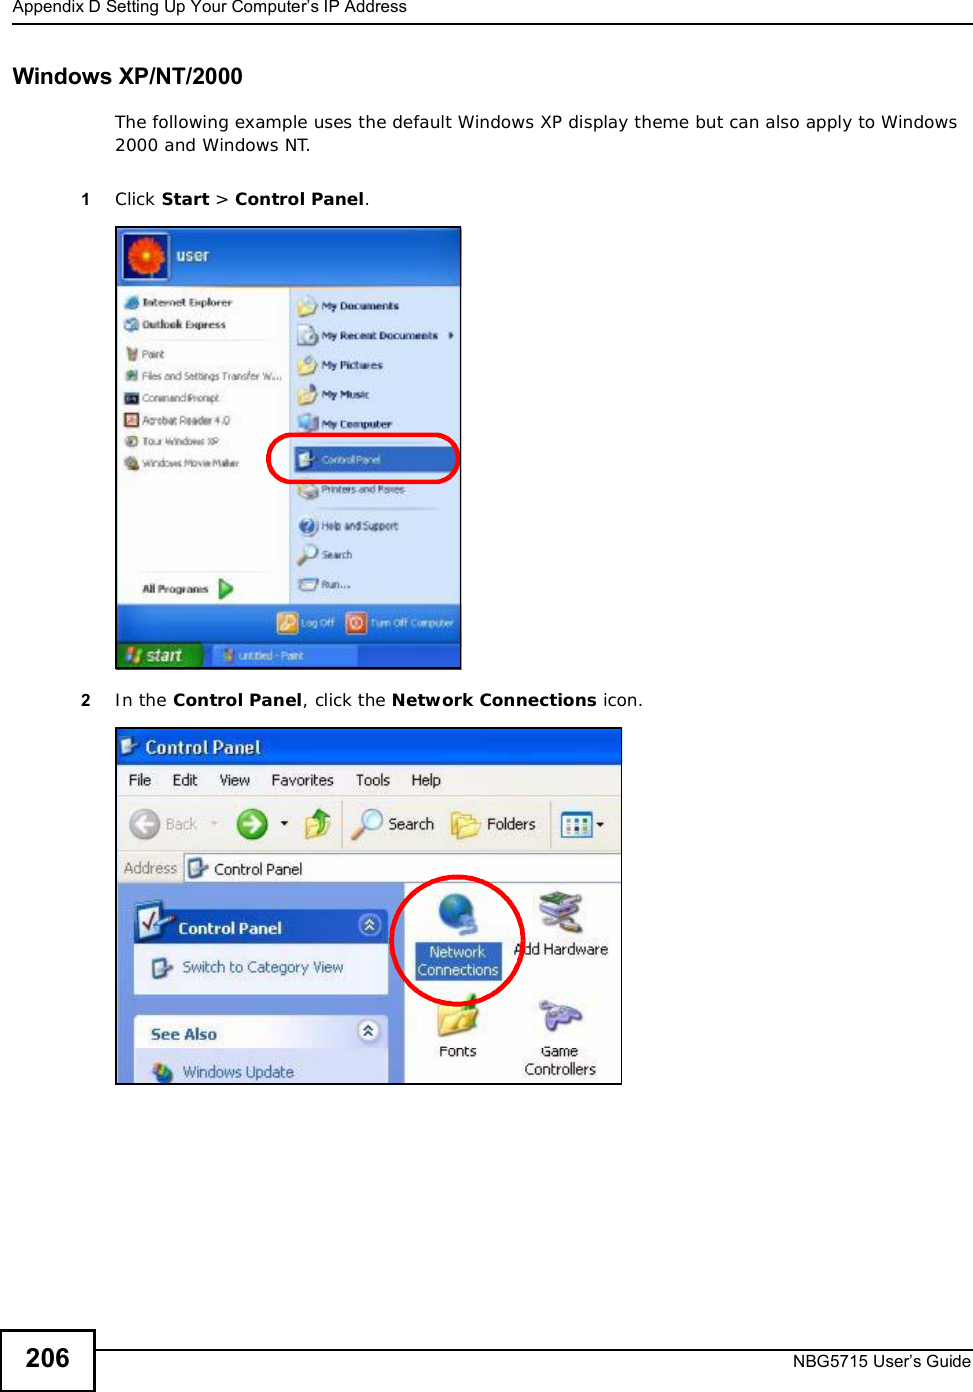 Appendix DSetting Up Your Computer’s IP AddressNBG5715 User’s Guide206Windows XP/NT/2000The following example uses the default Windows XP display theme but can also apply to Windows 2000 and Windows NT.1Click Start &gt;Control Panel.2In the Control Panel, click the Network Connections icon.